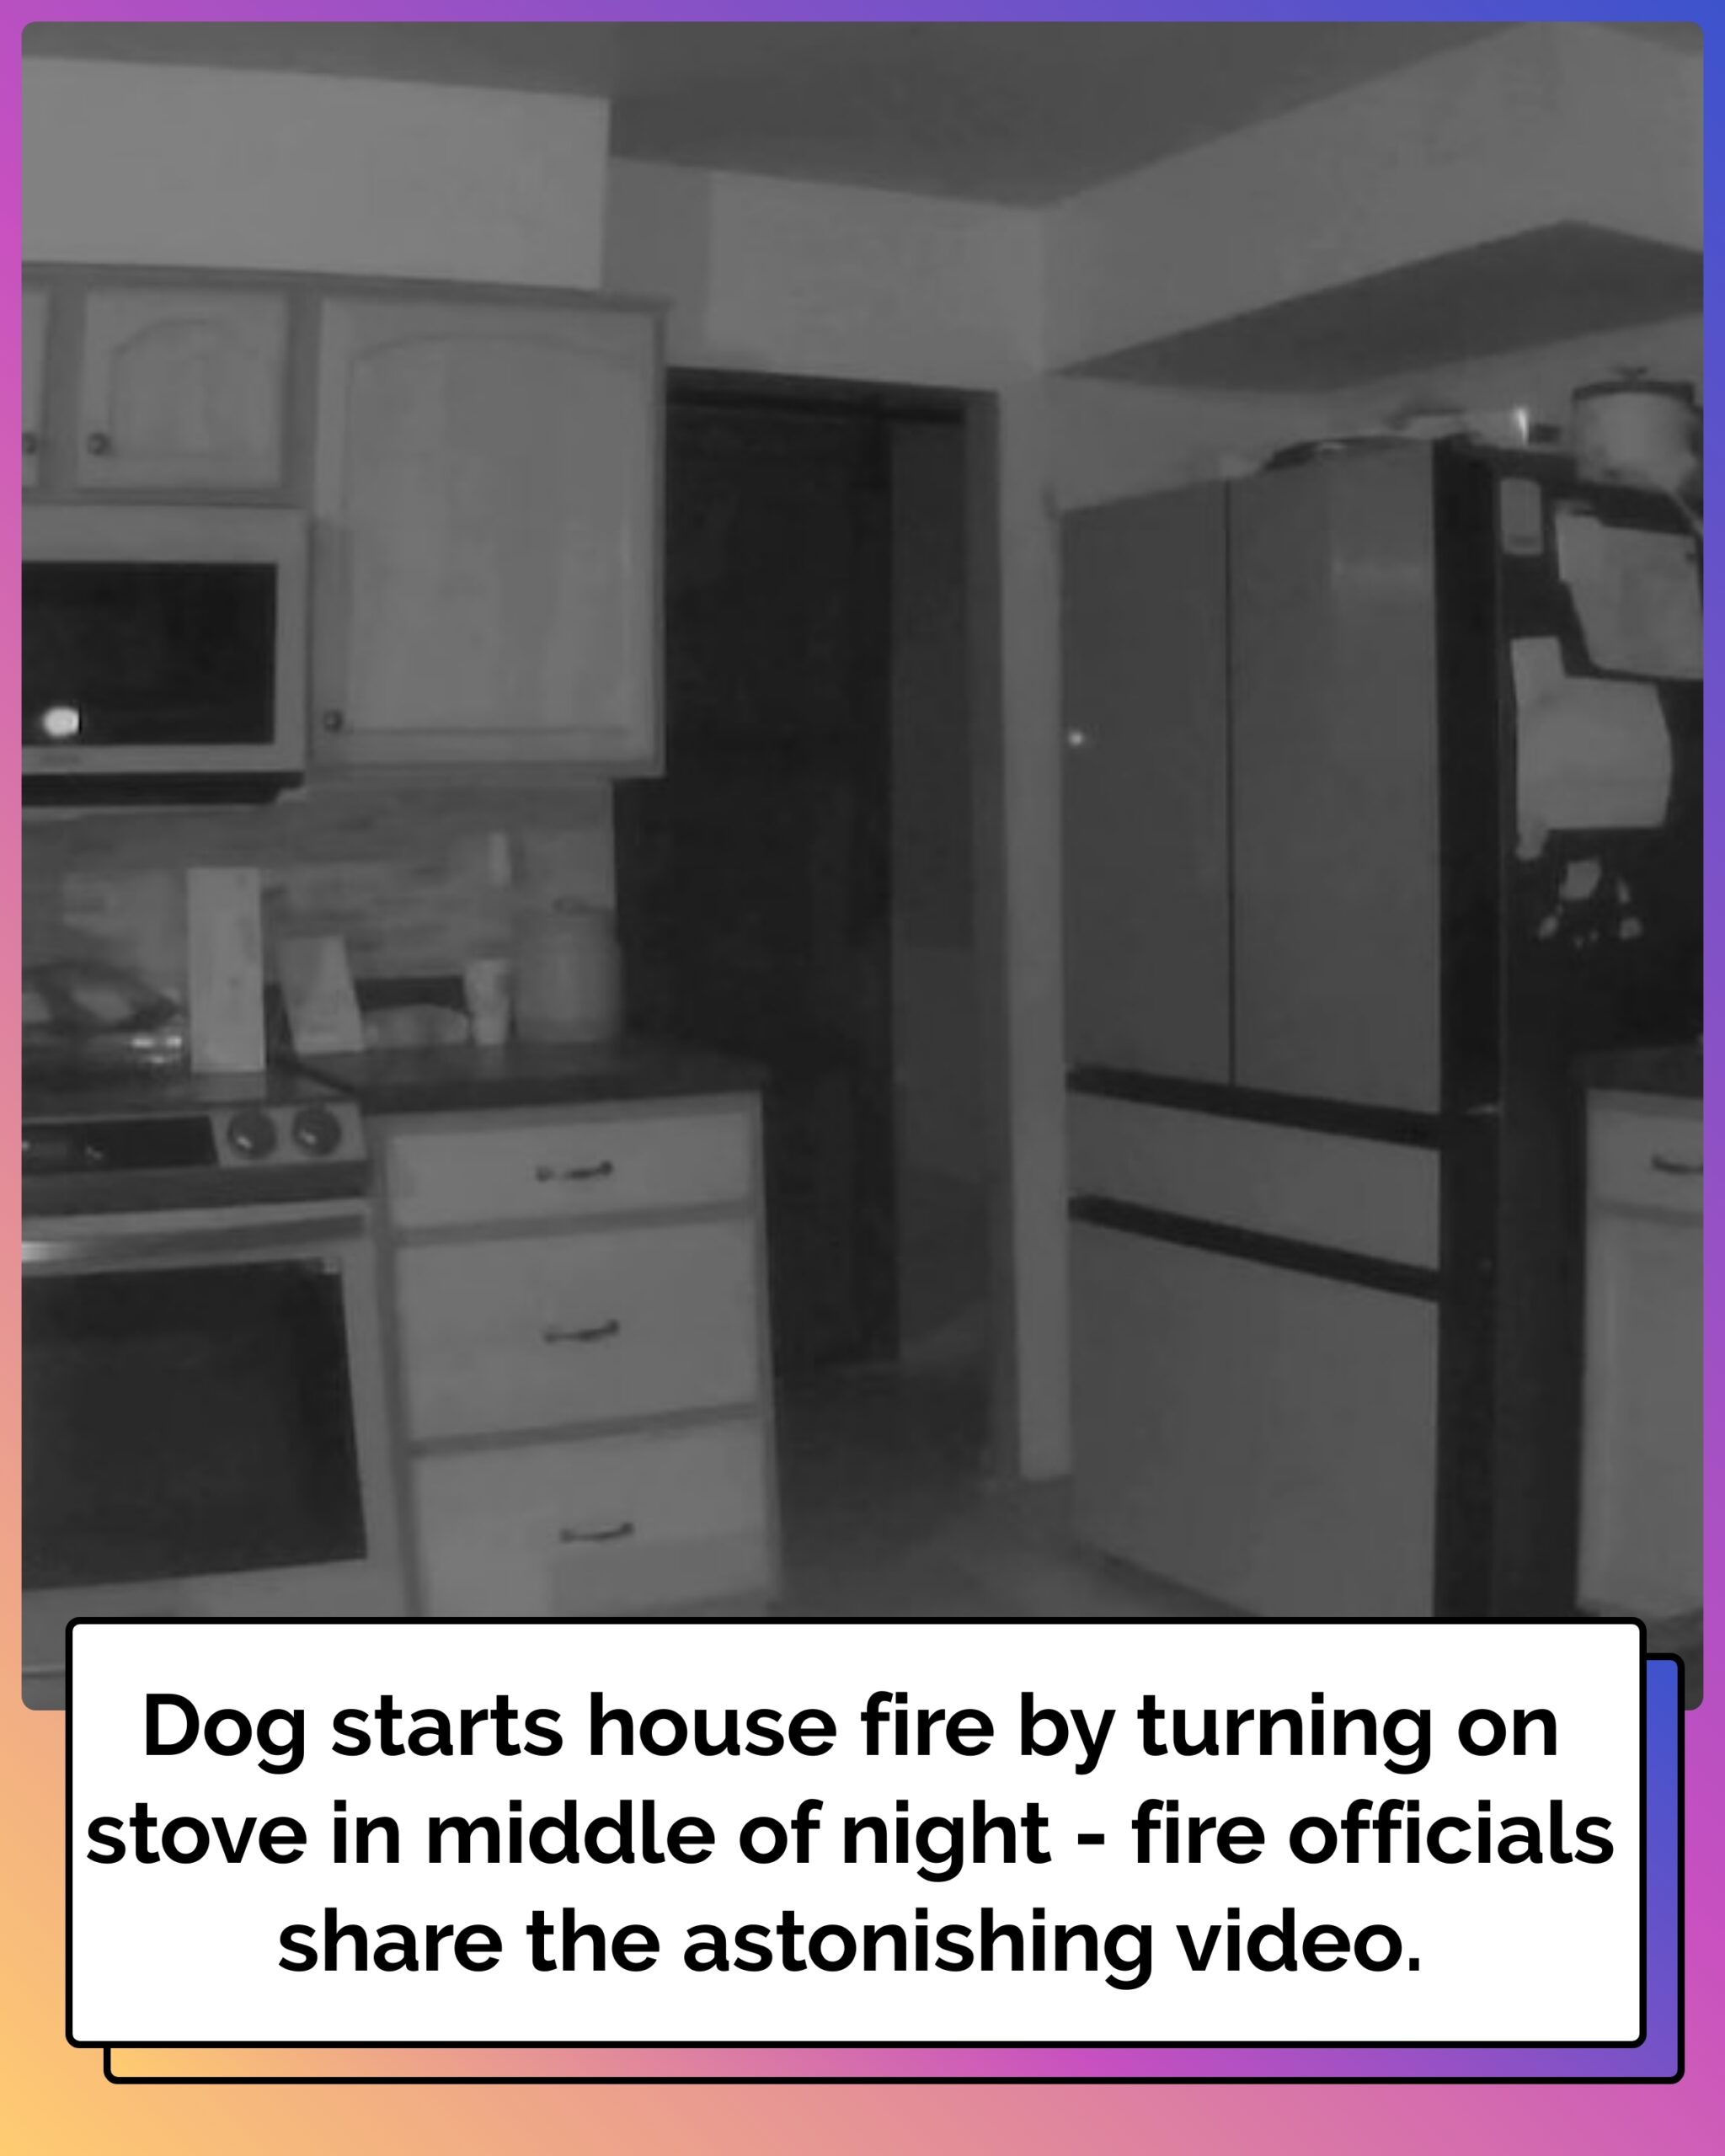 Video shows dog starting house fire by turning on stove in middle of night